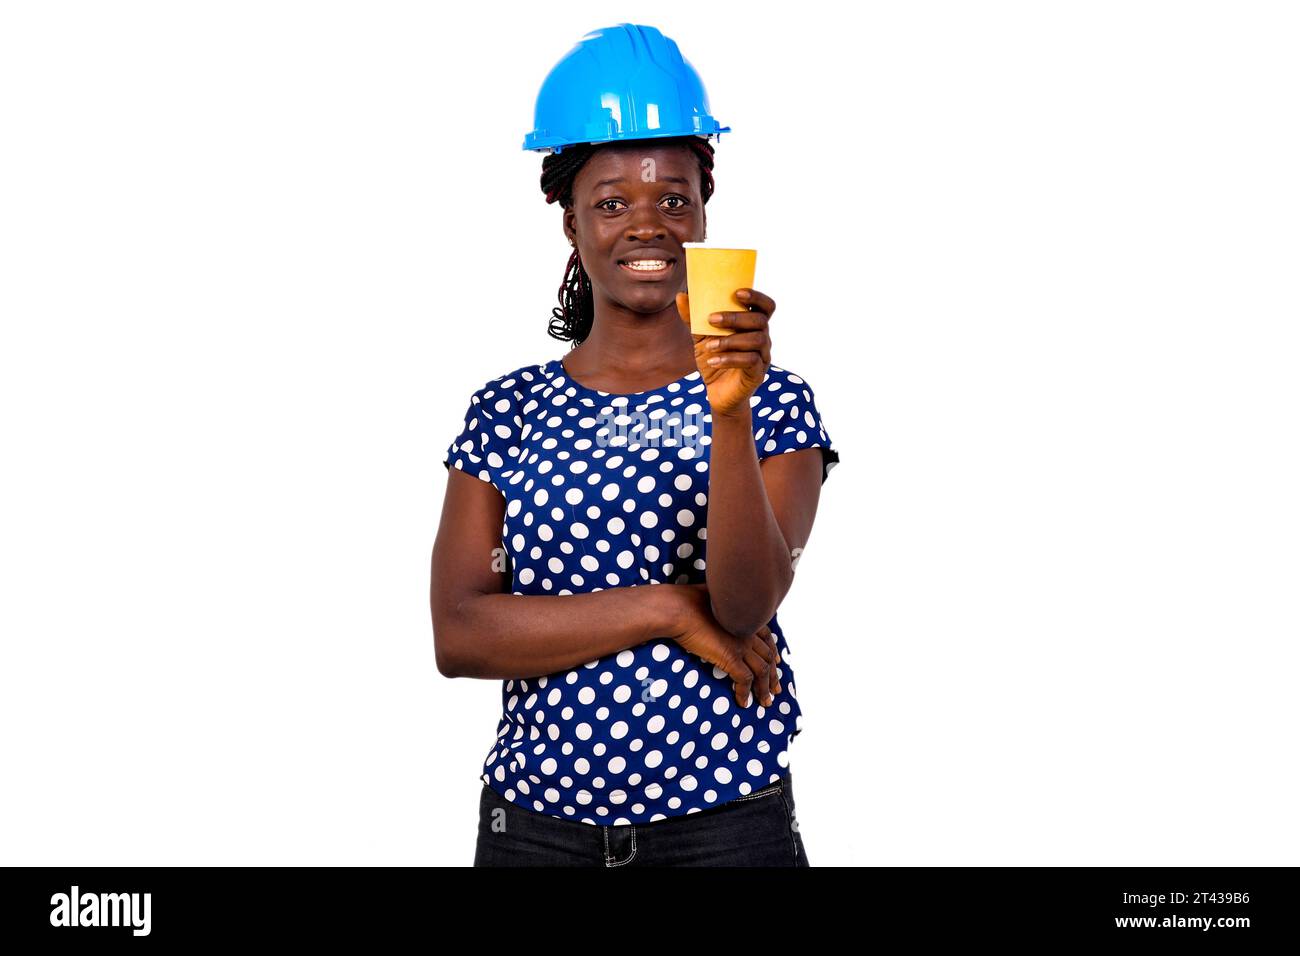 portrait of a beautiful young female construction engineer wearing a blue hard hat holding a paper cup of coffee while smiling. Stock Photo